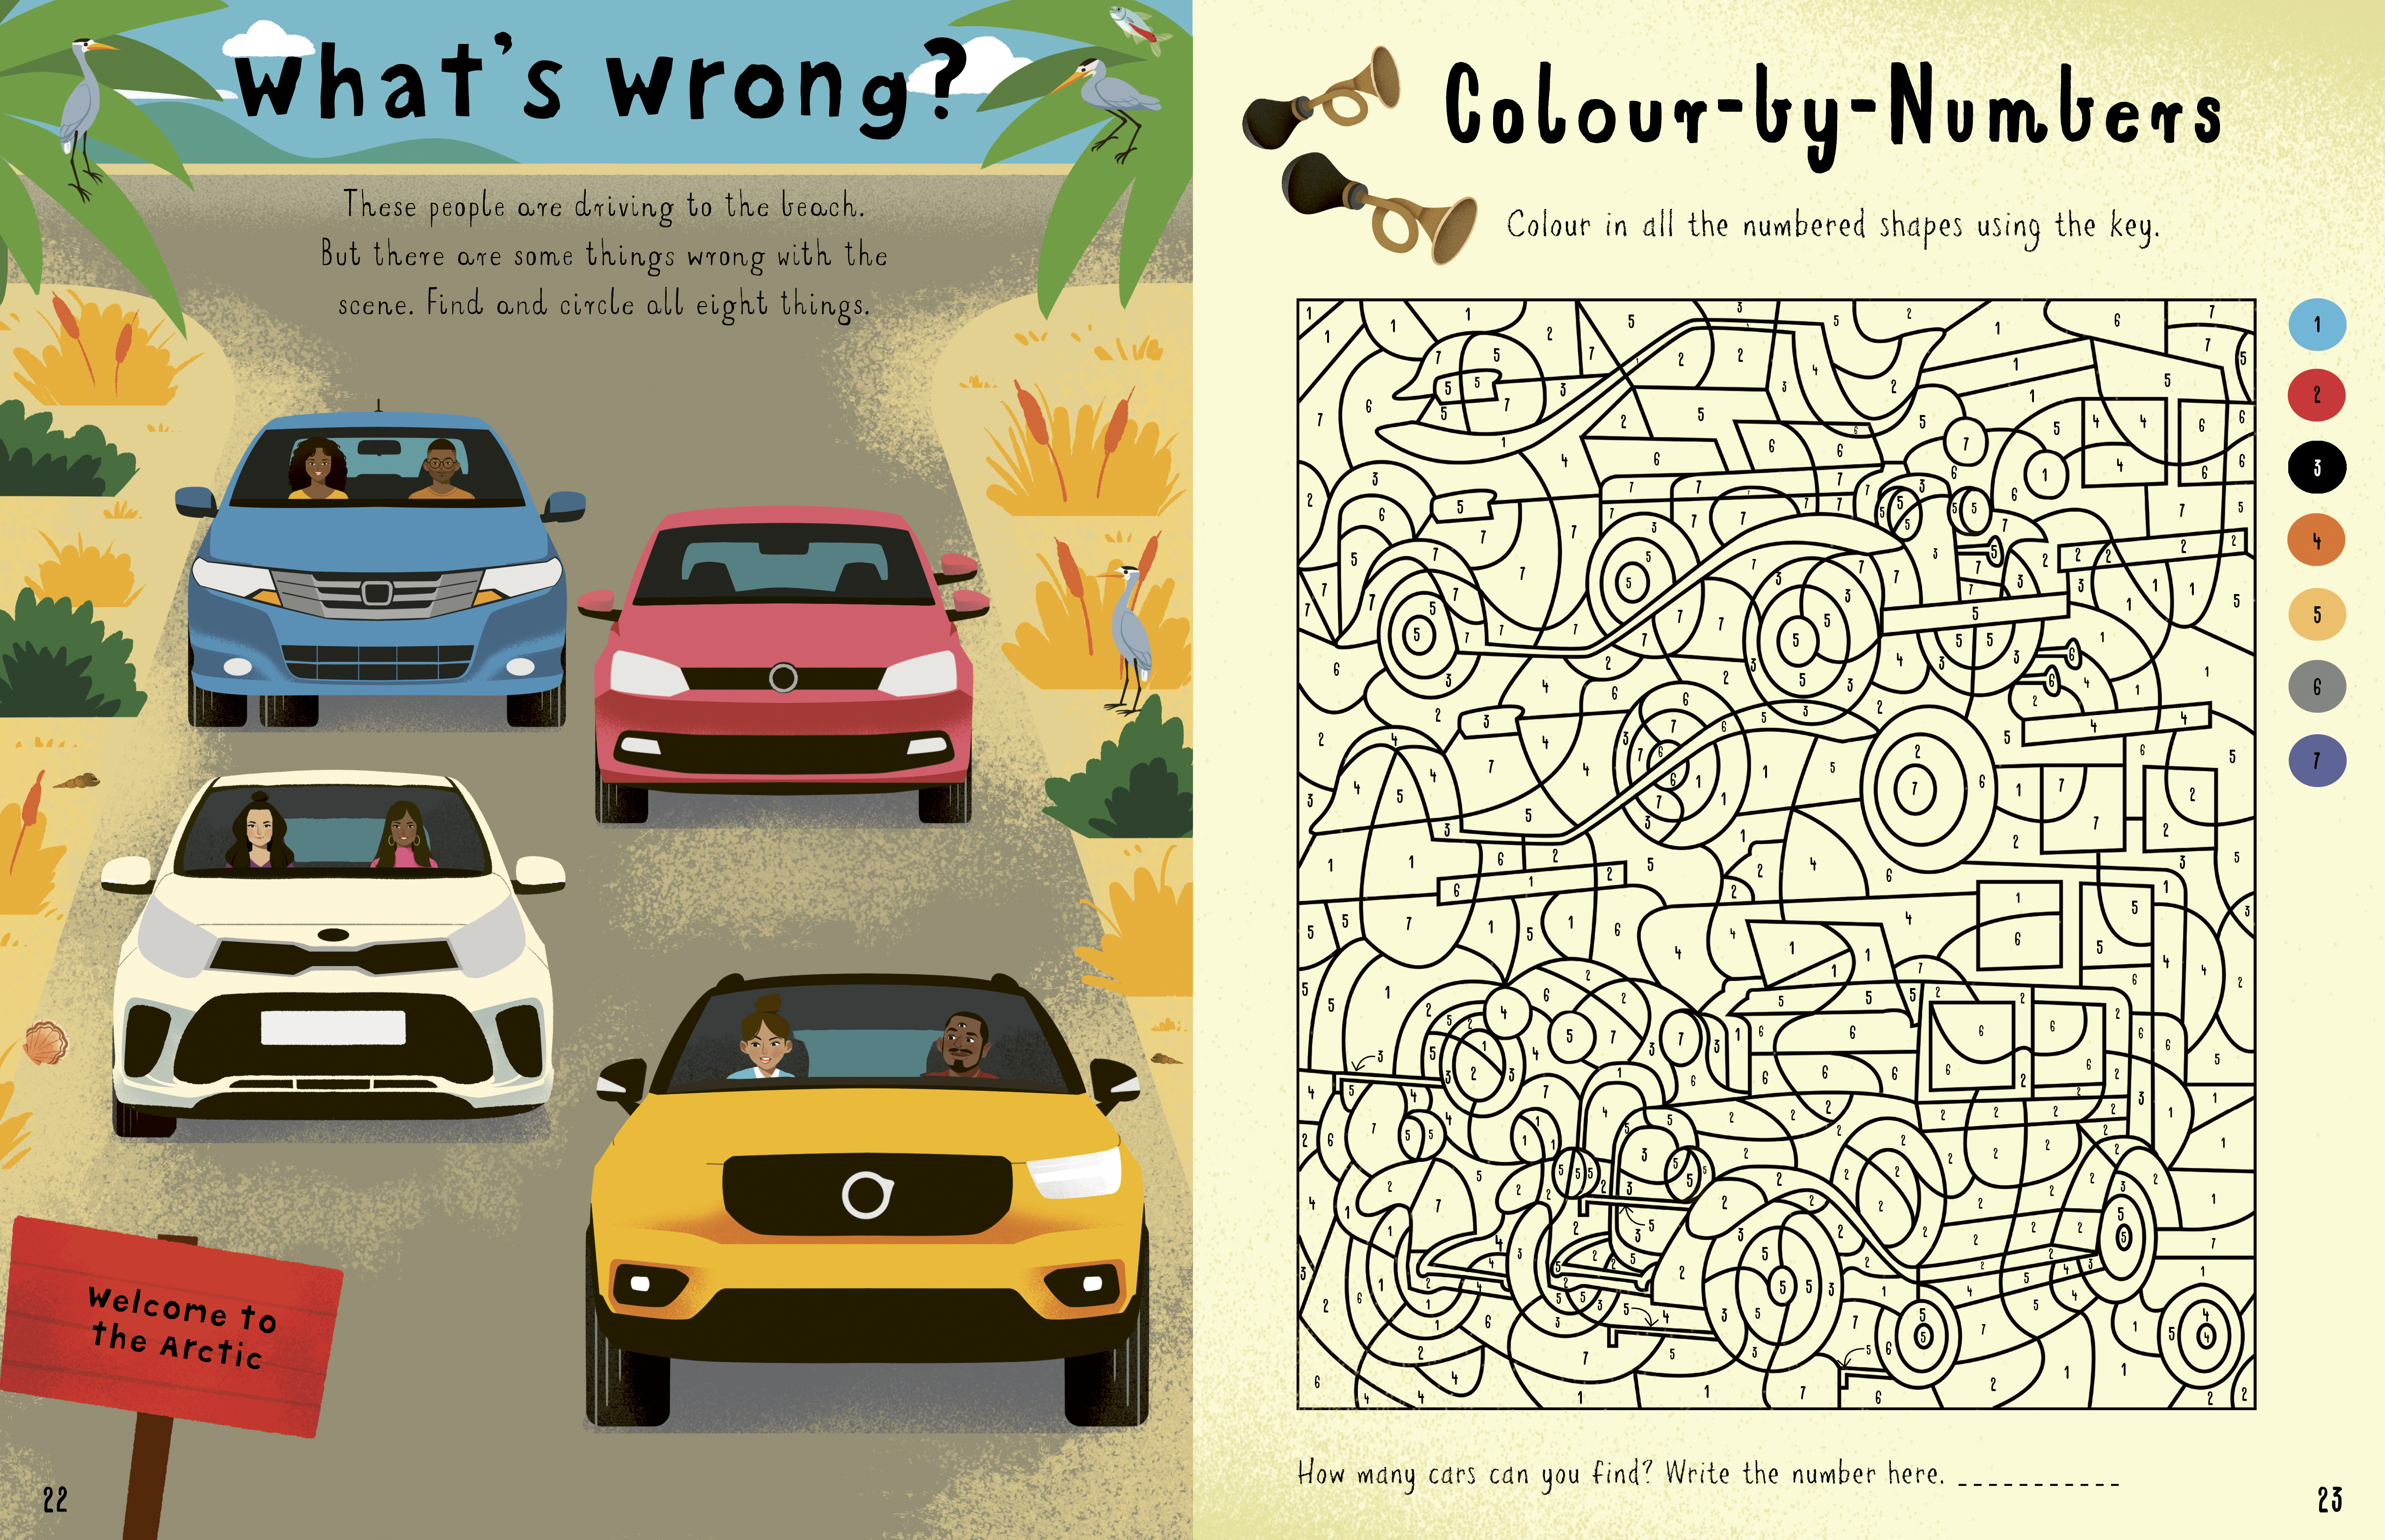 In the Car Activity Book